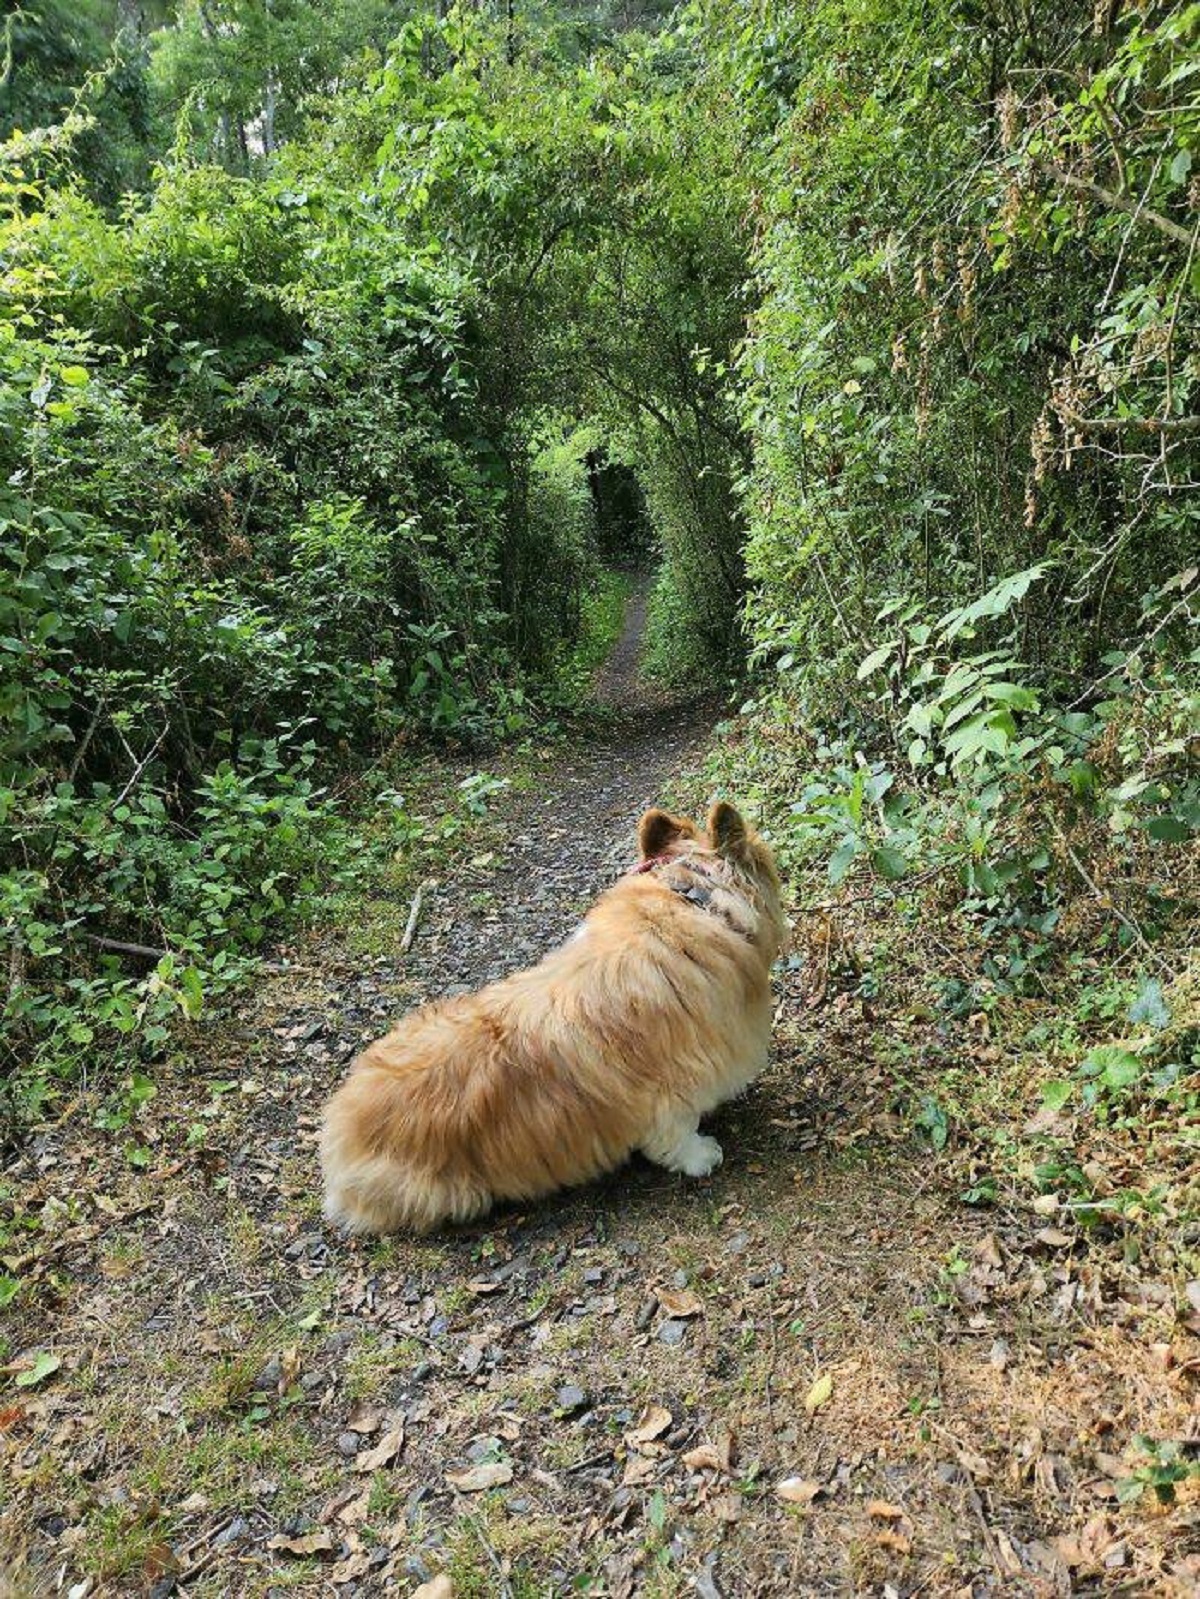 "My Dog Was Pretty Nervous About Heading Down This Trail For Some Reason"